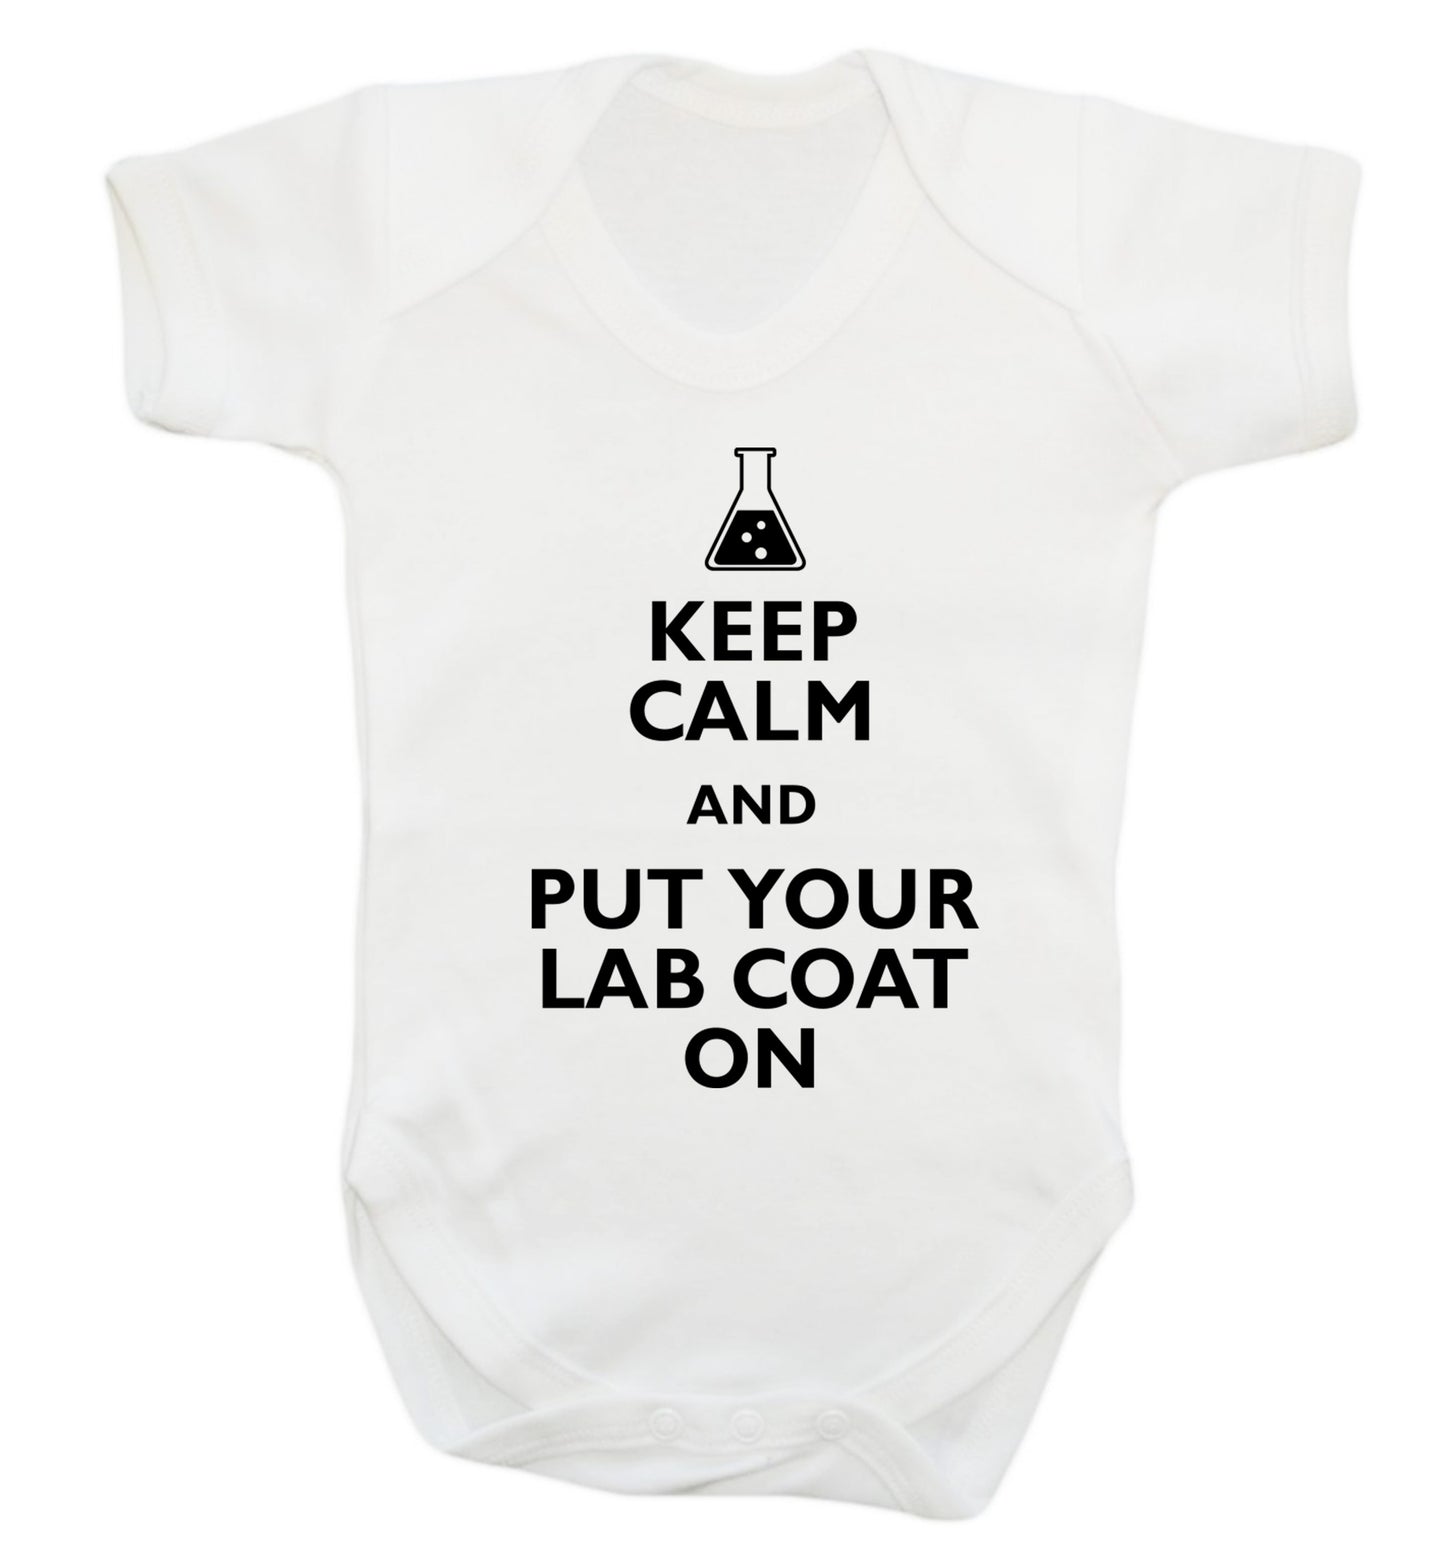 Keep calm and put your lab coat on Baby Vest white 18-24 months